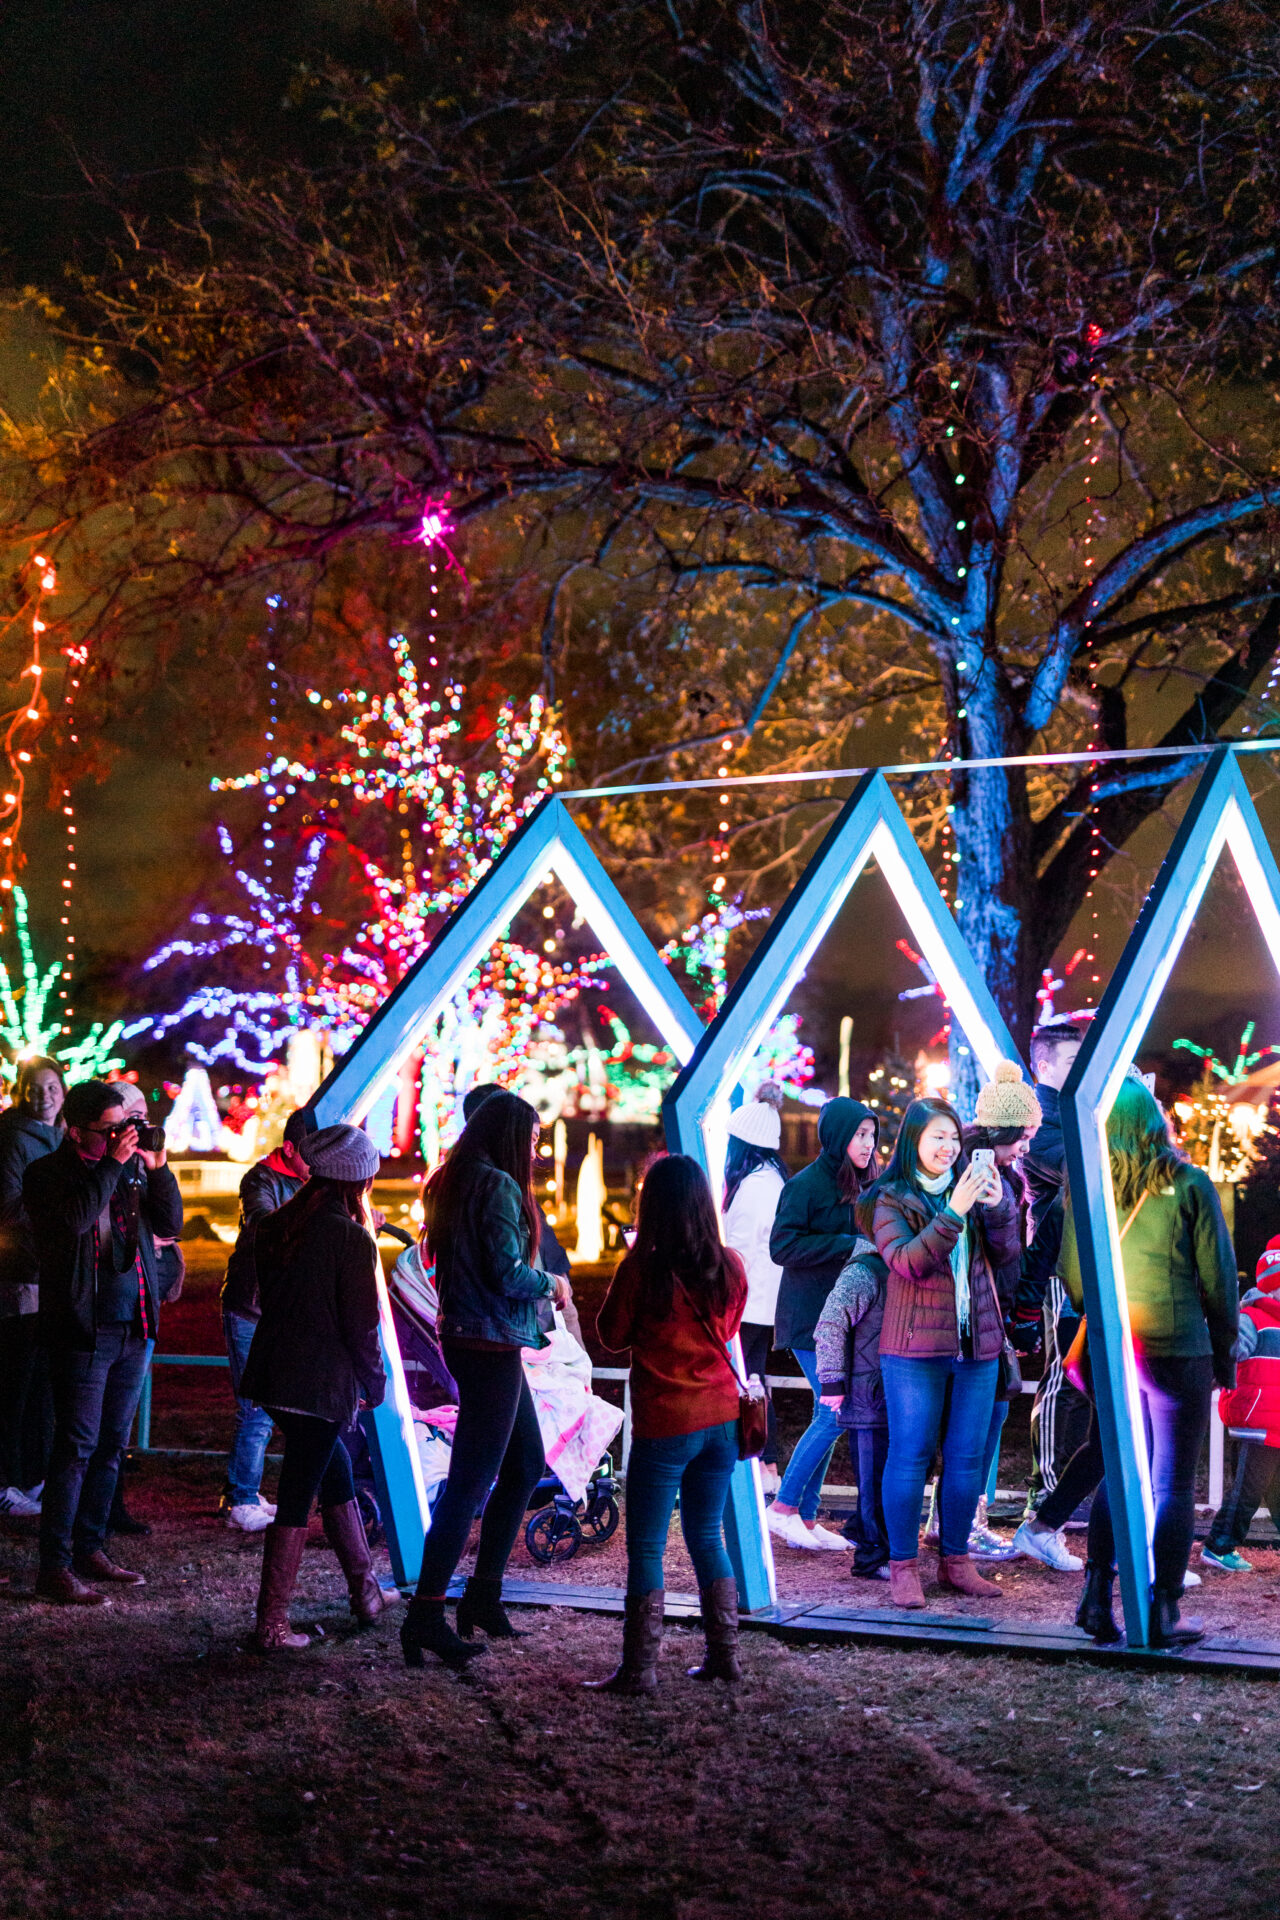 People visiting Trail of Lights, one of the Austin Christmas events